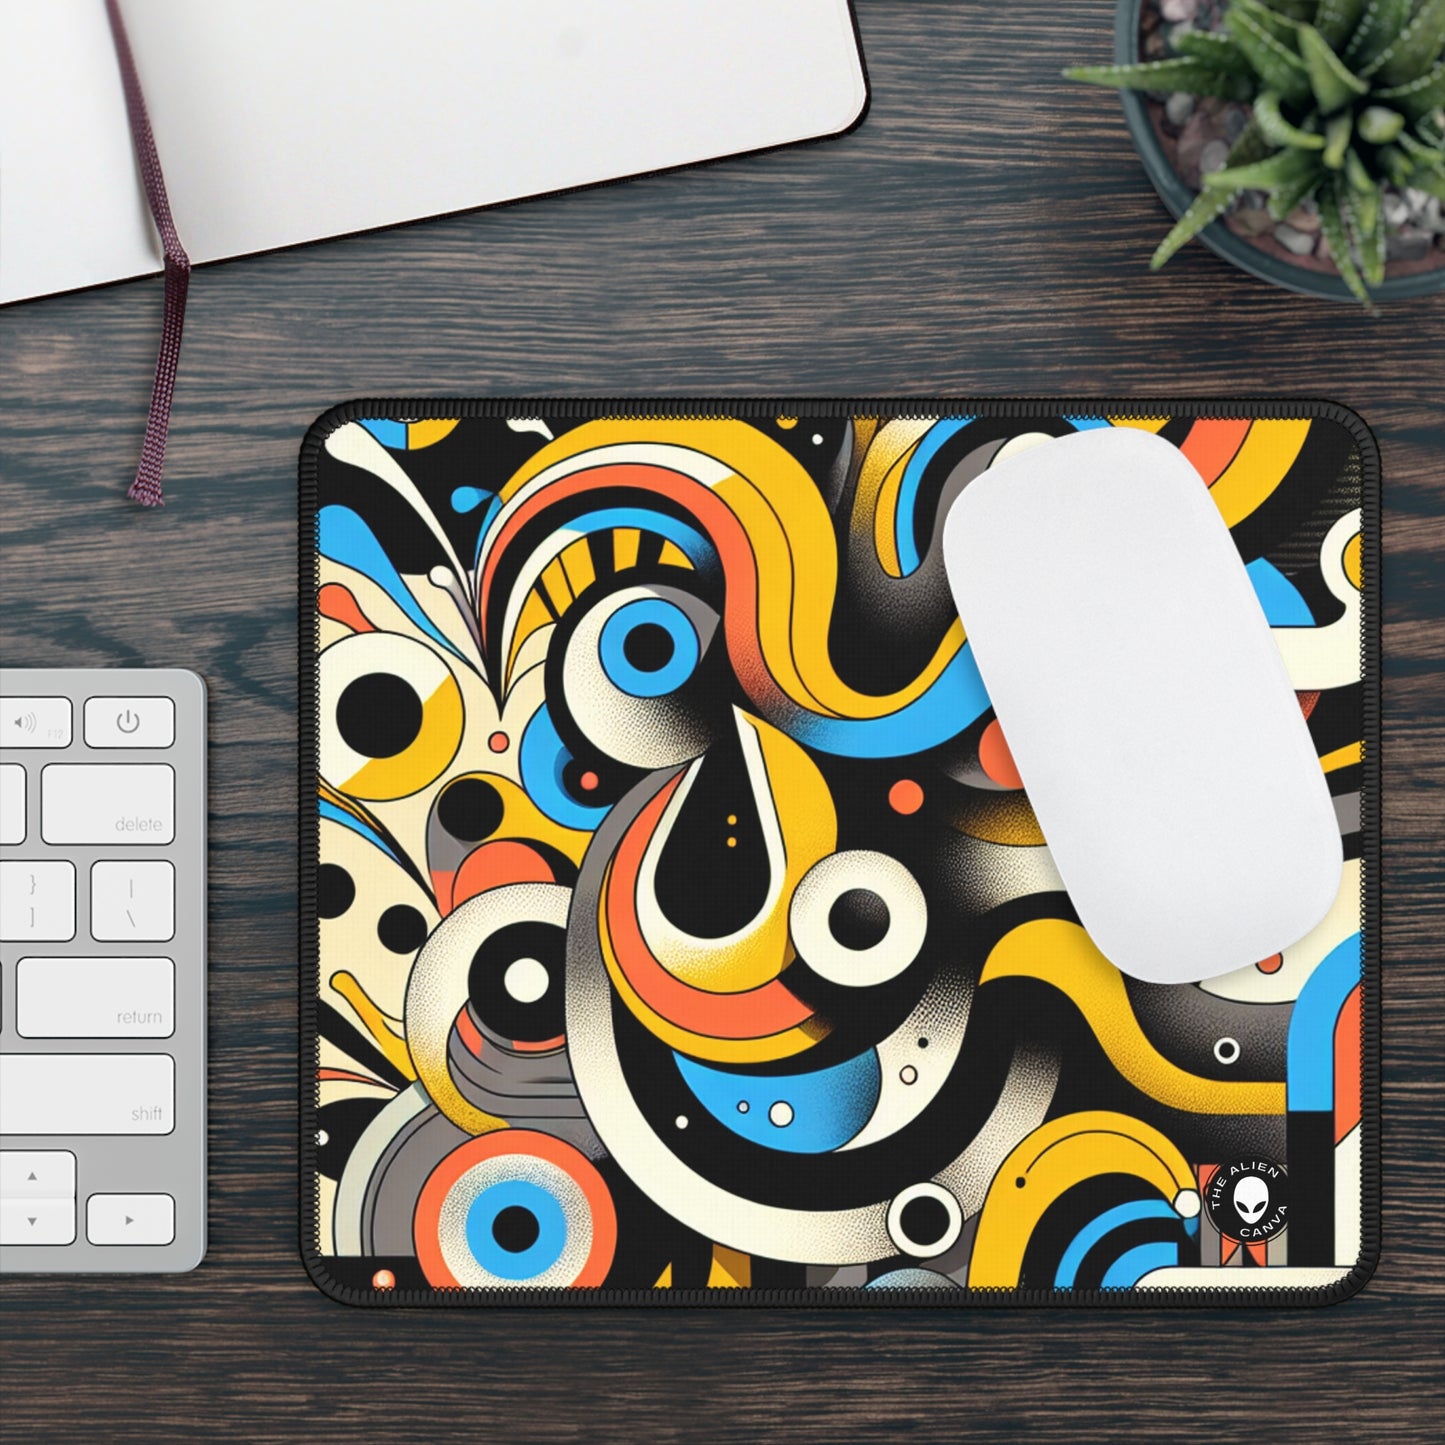 "Dada Fusion: A Whimsical Chaos of Everyday Objects" - The Alien Gaming Mouse Pad Neo-Dada